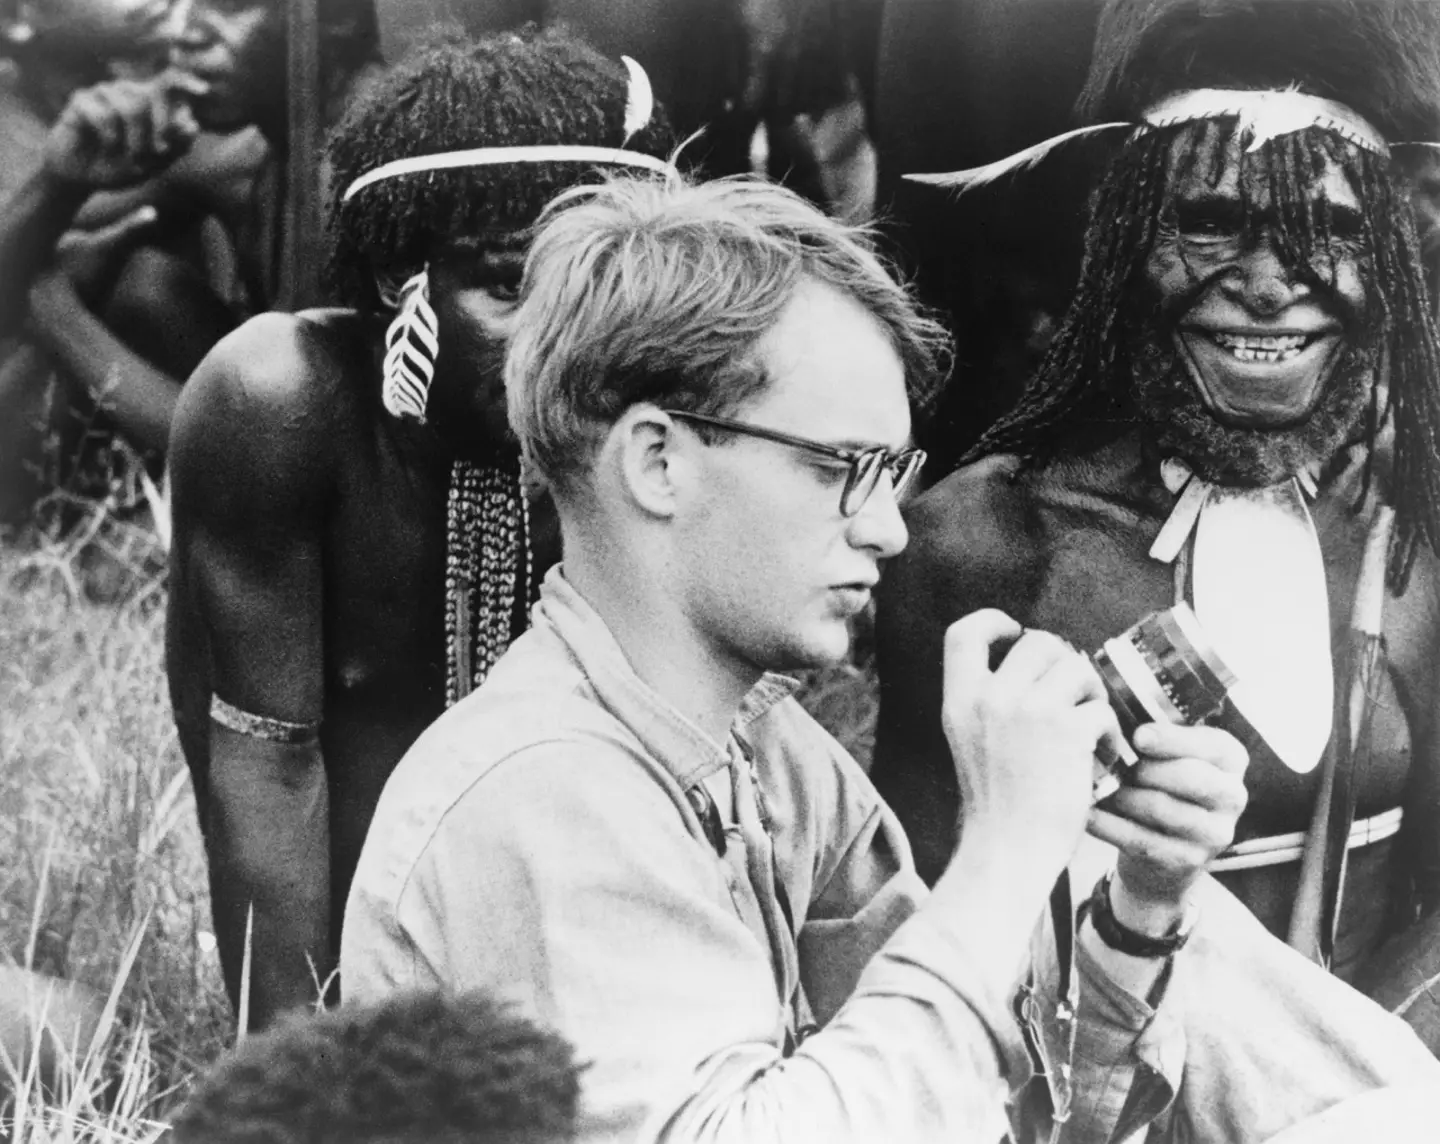 Michael Rockefeller's disappearance is still a talking point even to this day.